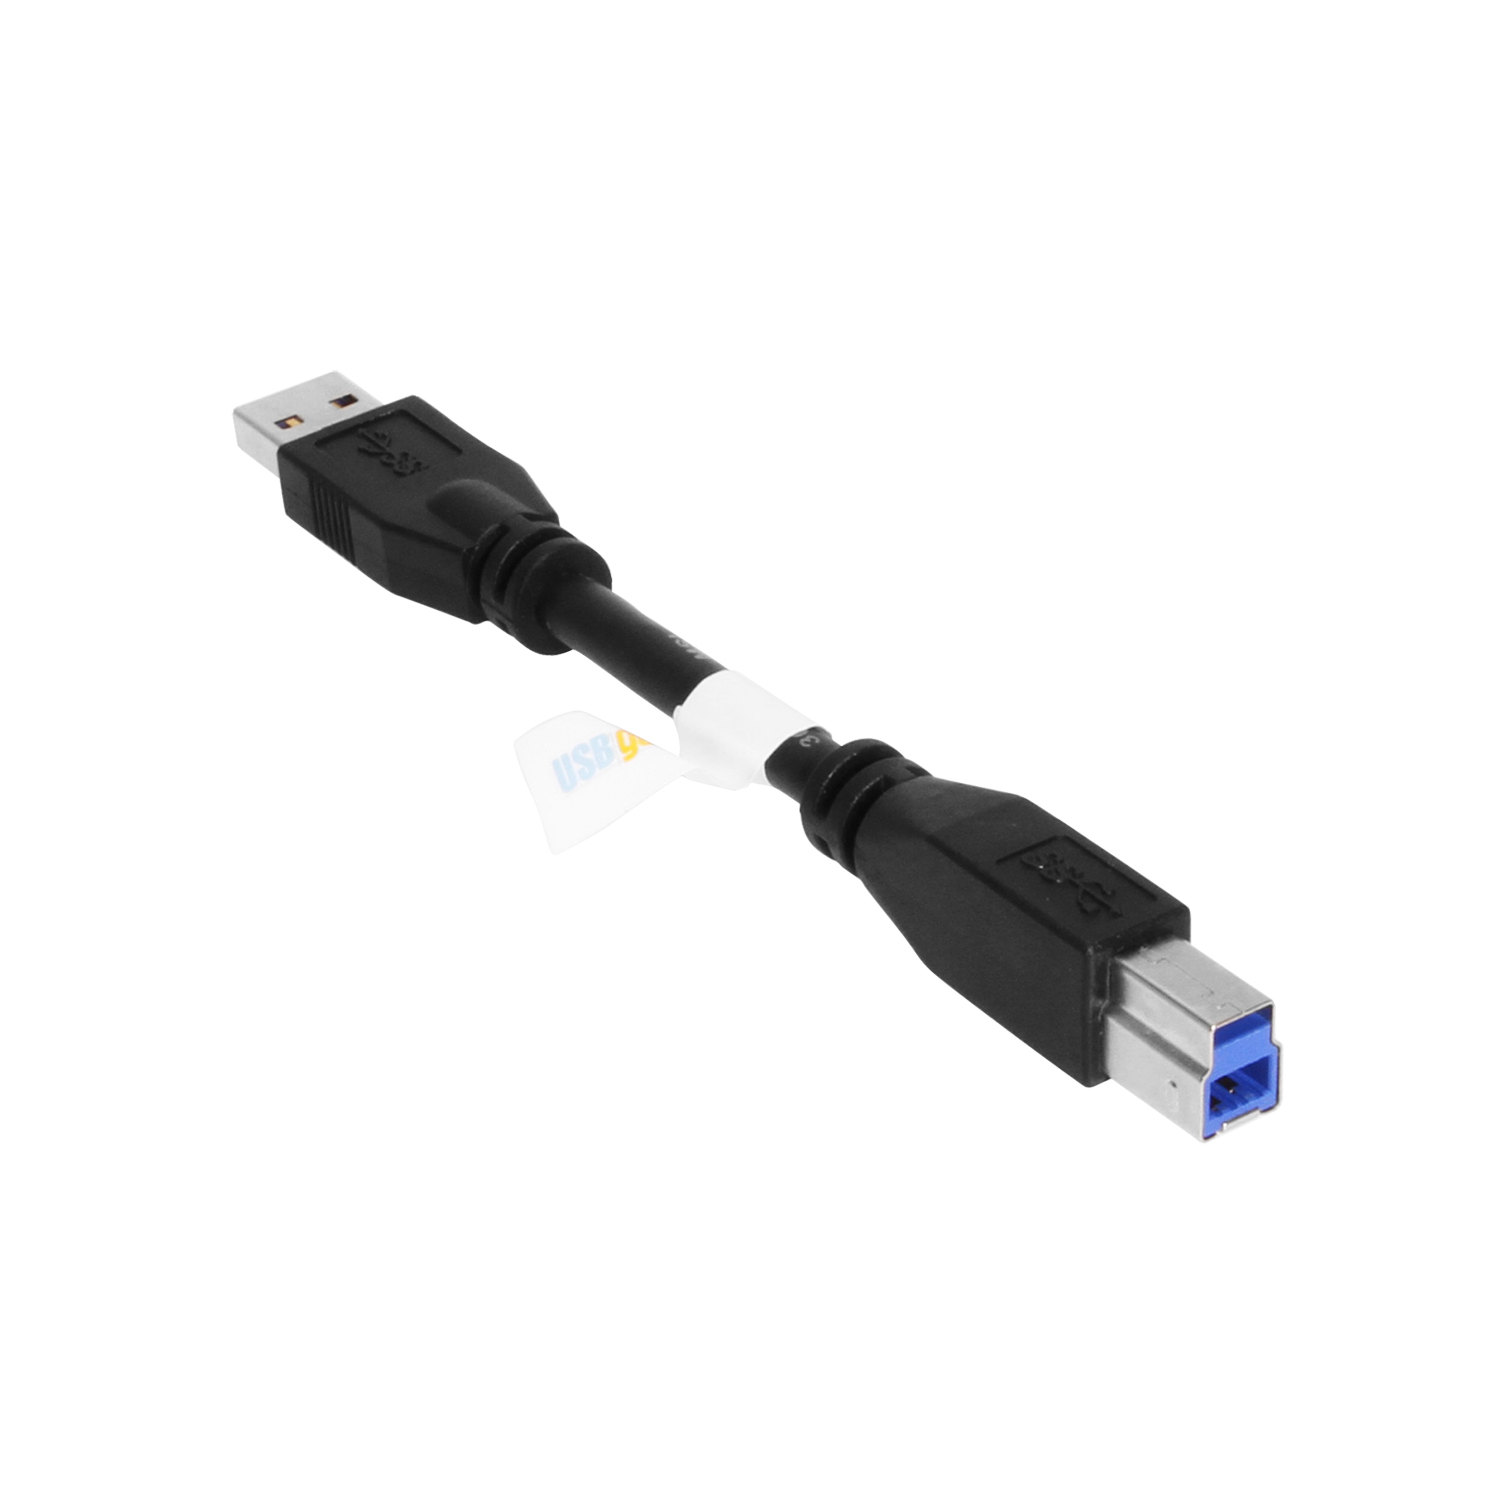 USB 3.1 Gen 1 (5 Gbps) Cable, USB Type-C (USB-C) to USB 3.0 Type-B M/M,  3-ft. Length